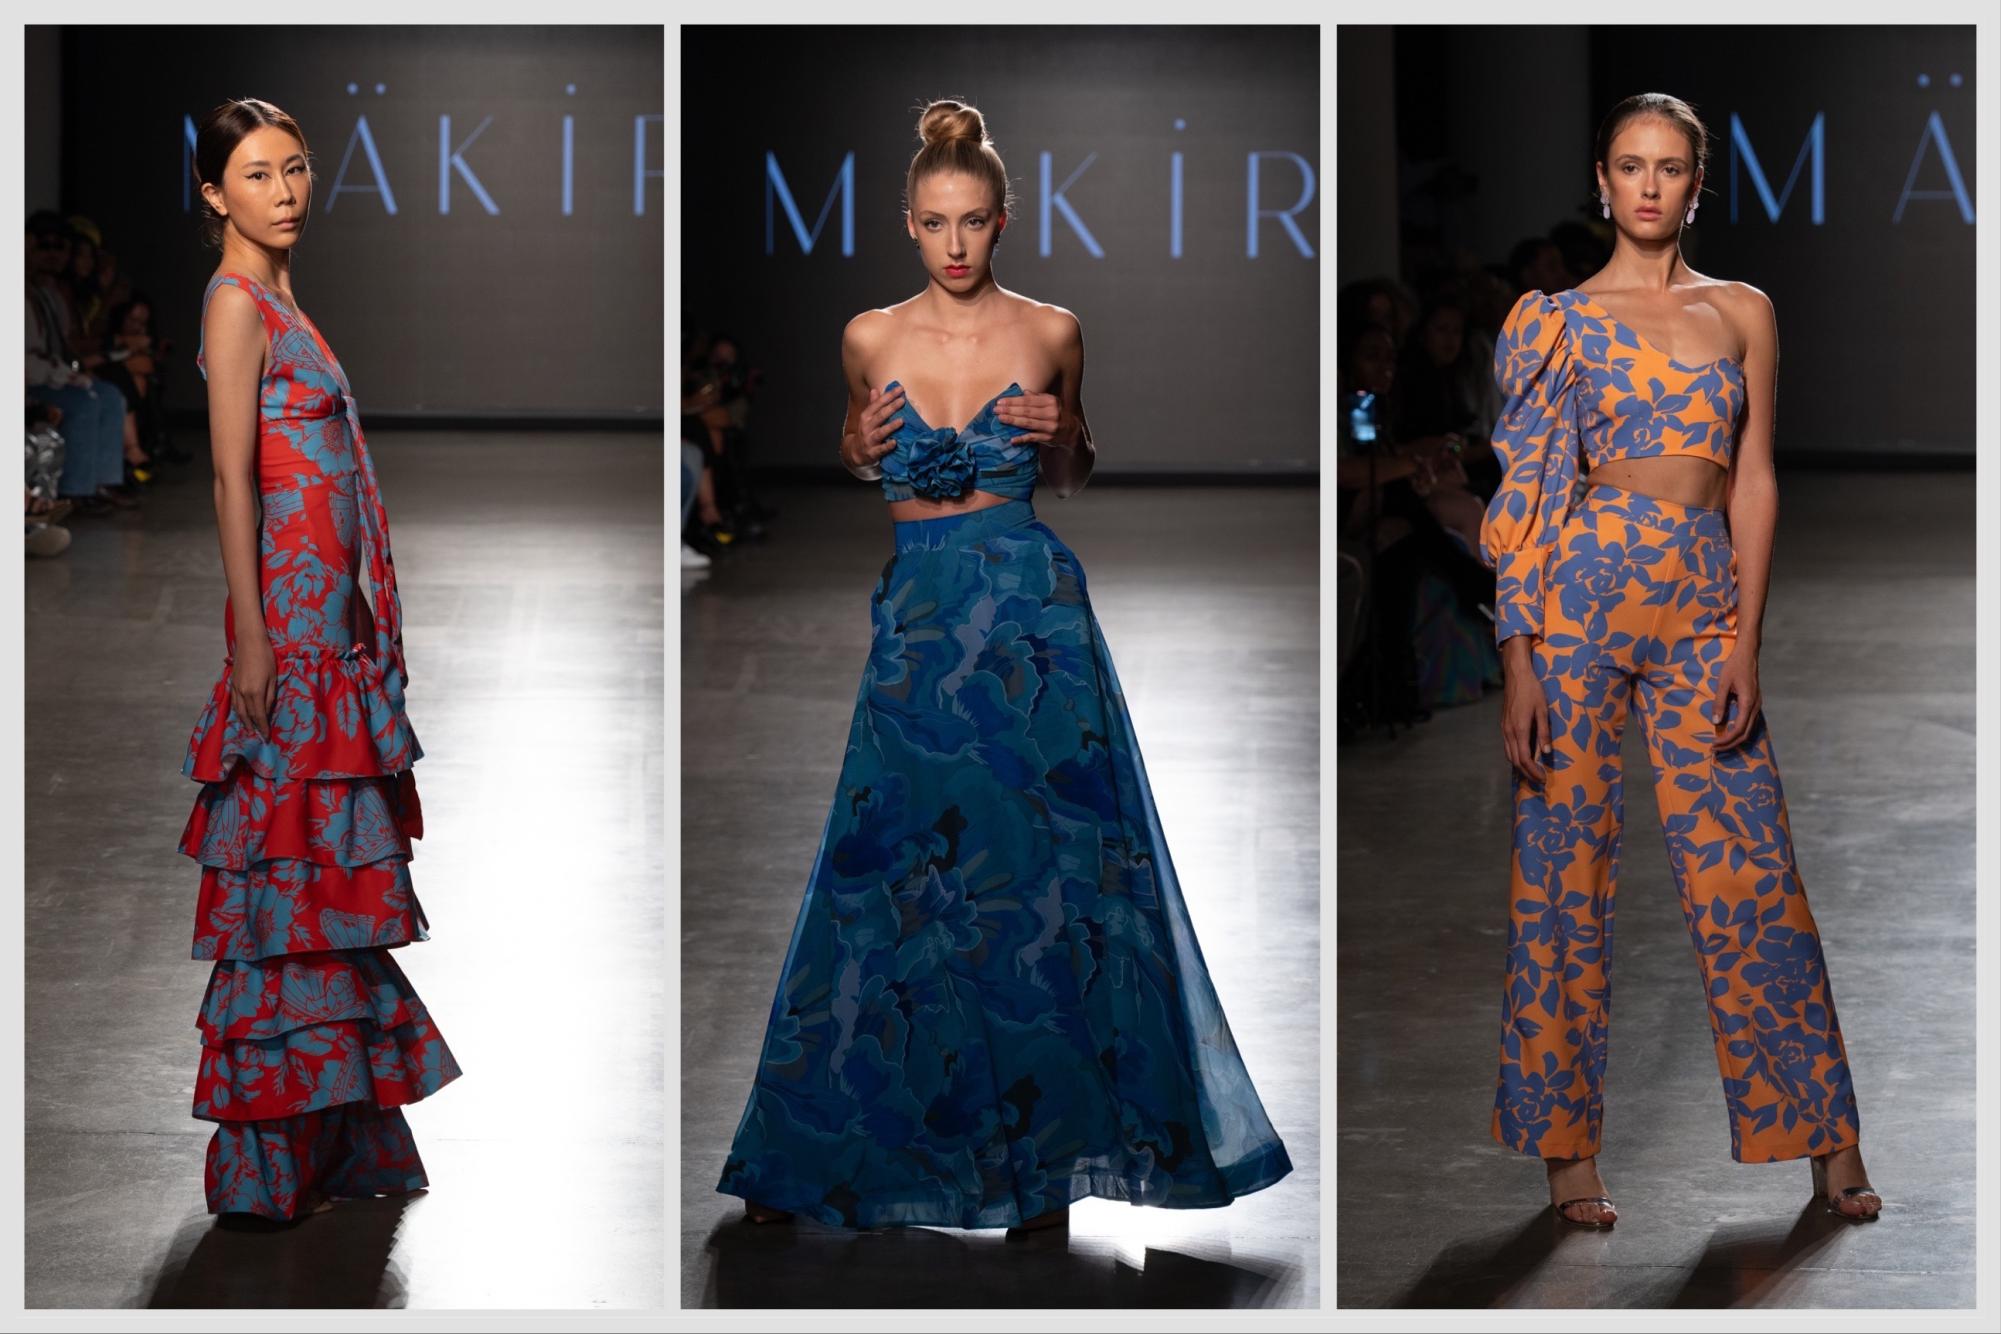 From left to right: a model wearing a blue-and-red floral dress; a model wearing a blue floral dress; a model wearing and blue-and-orange floral dress.